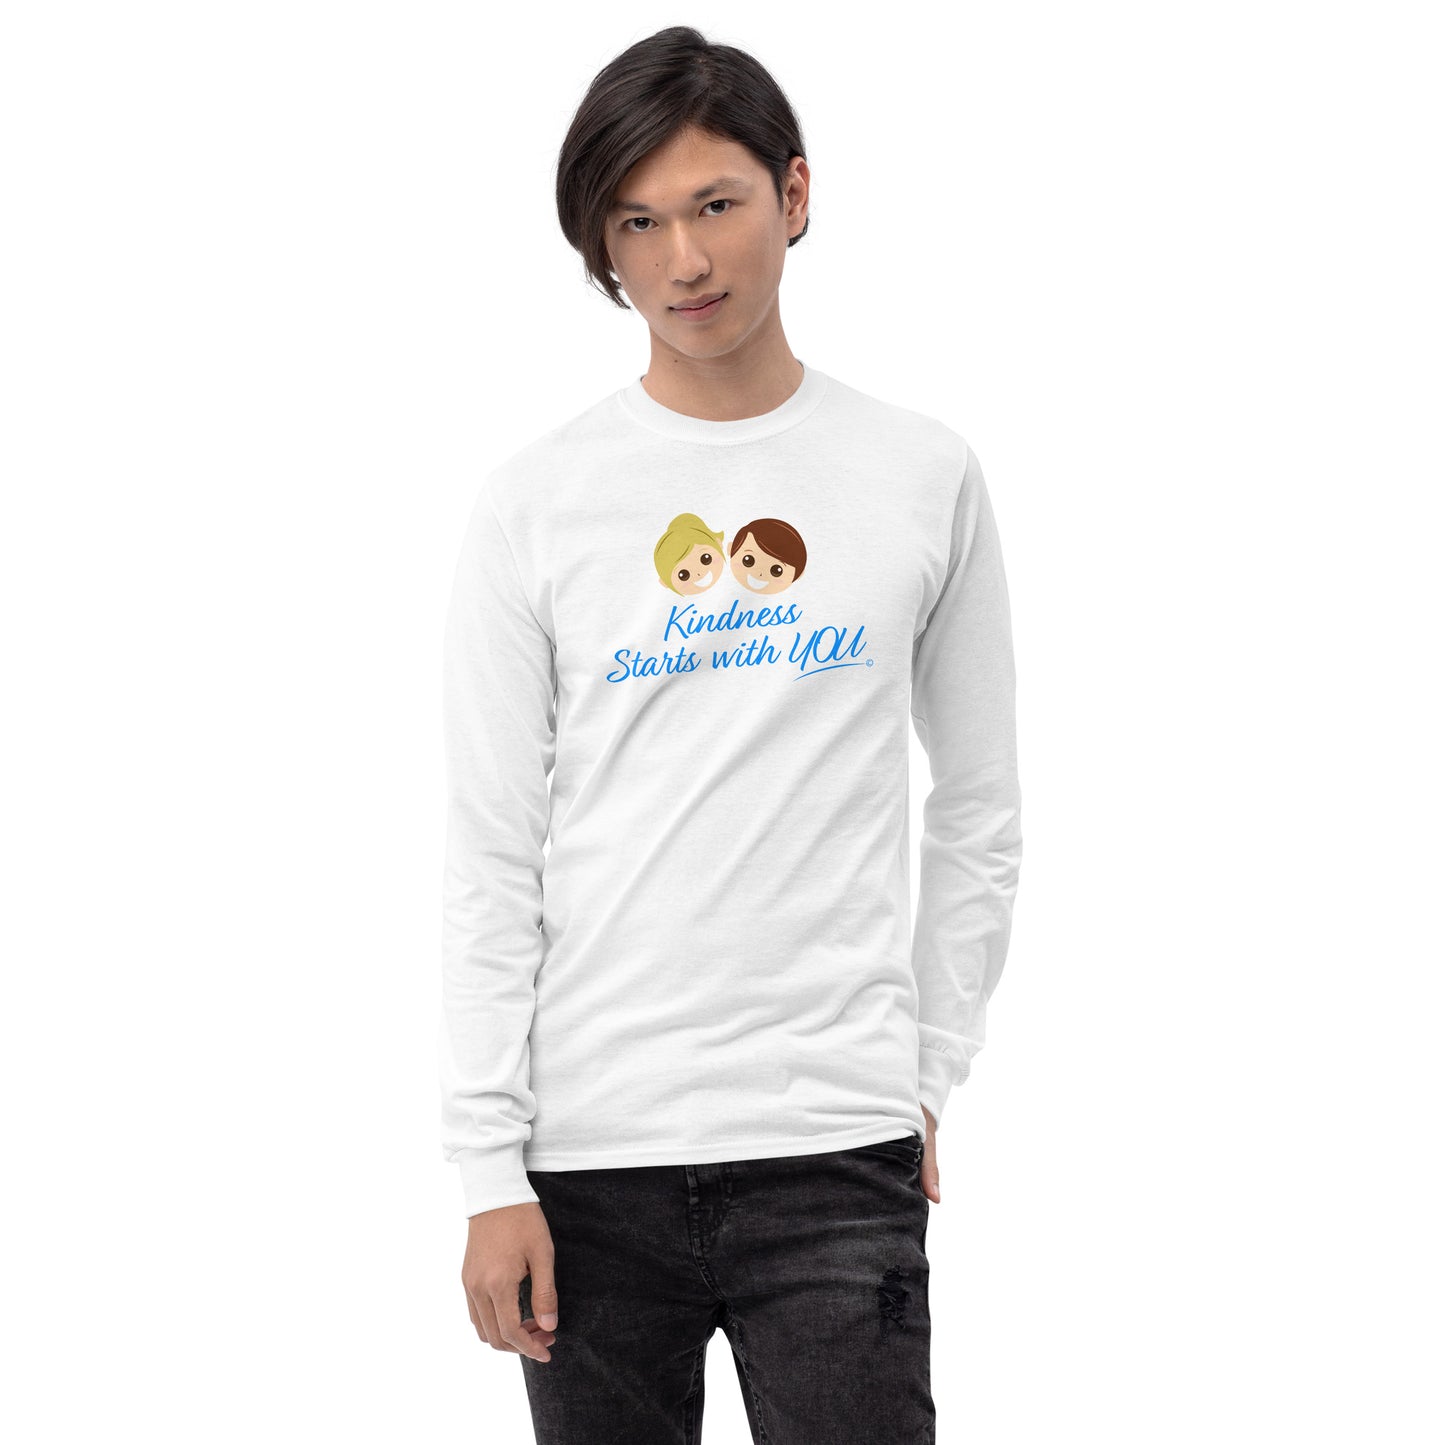 Kindness Starts with You Unisex Long-Sleeve Shirts